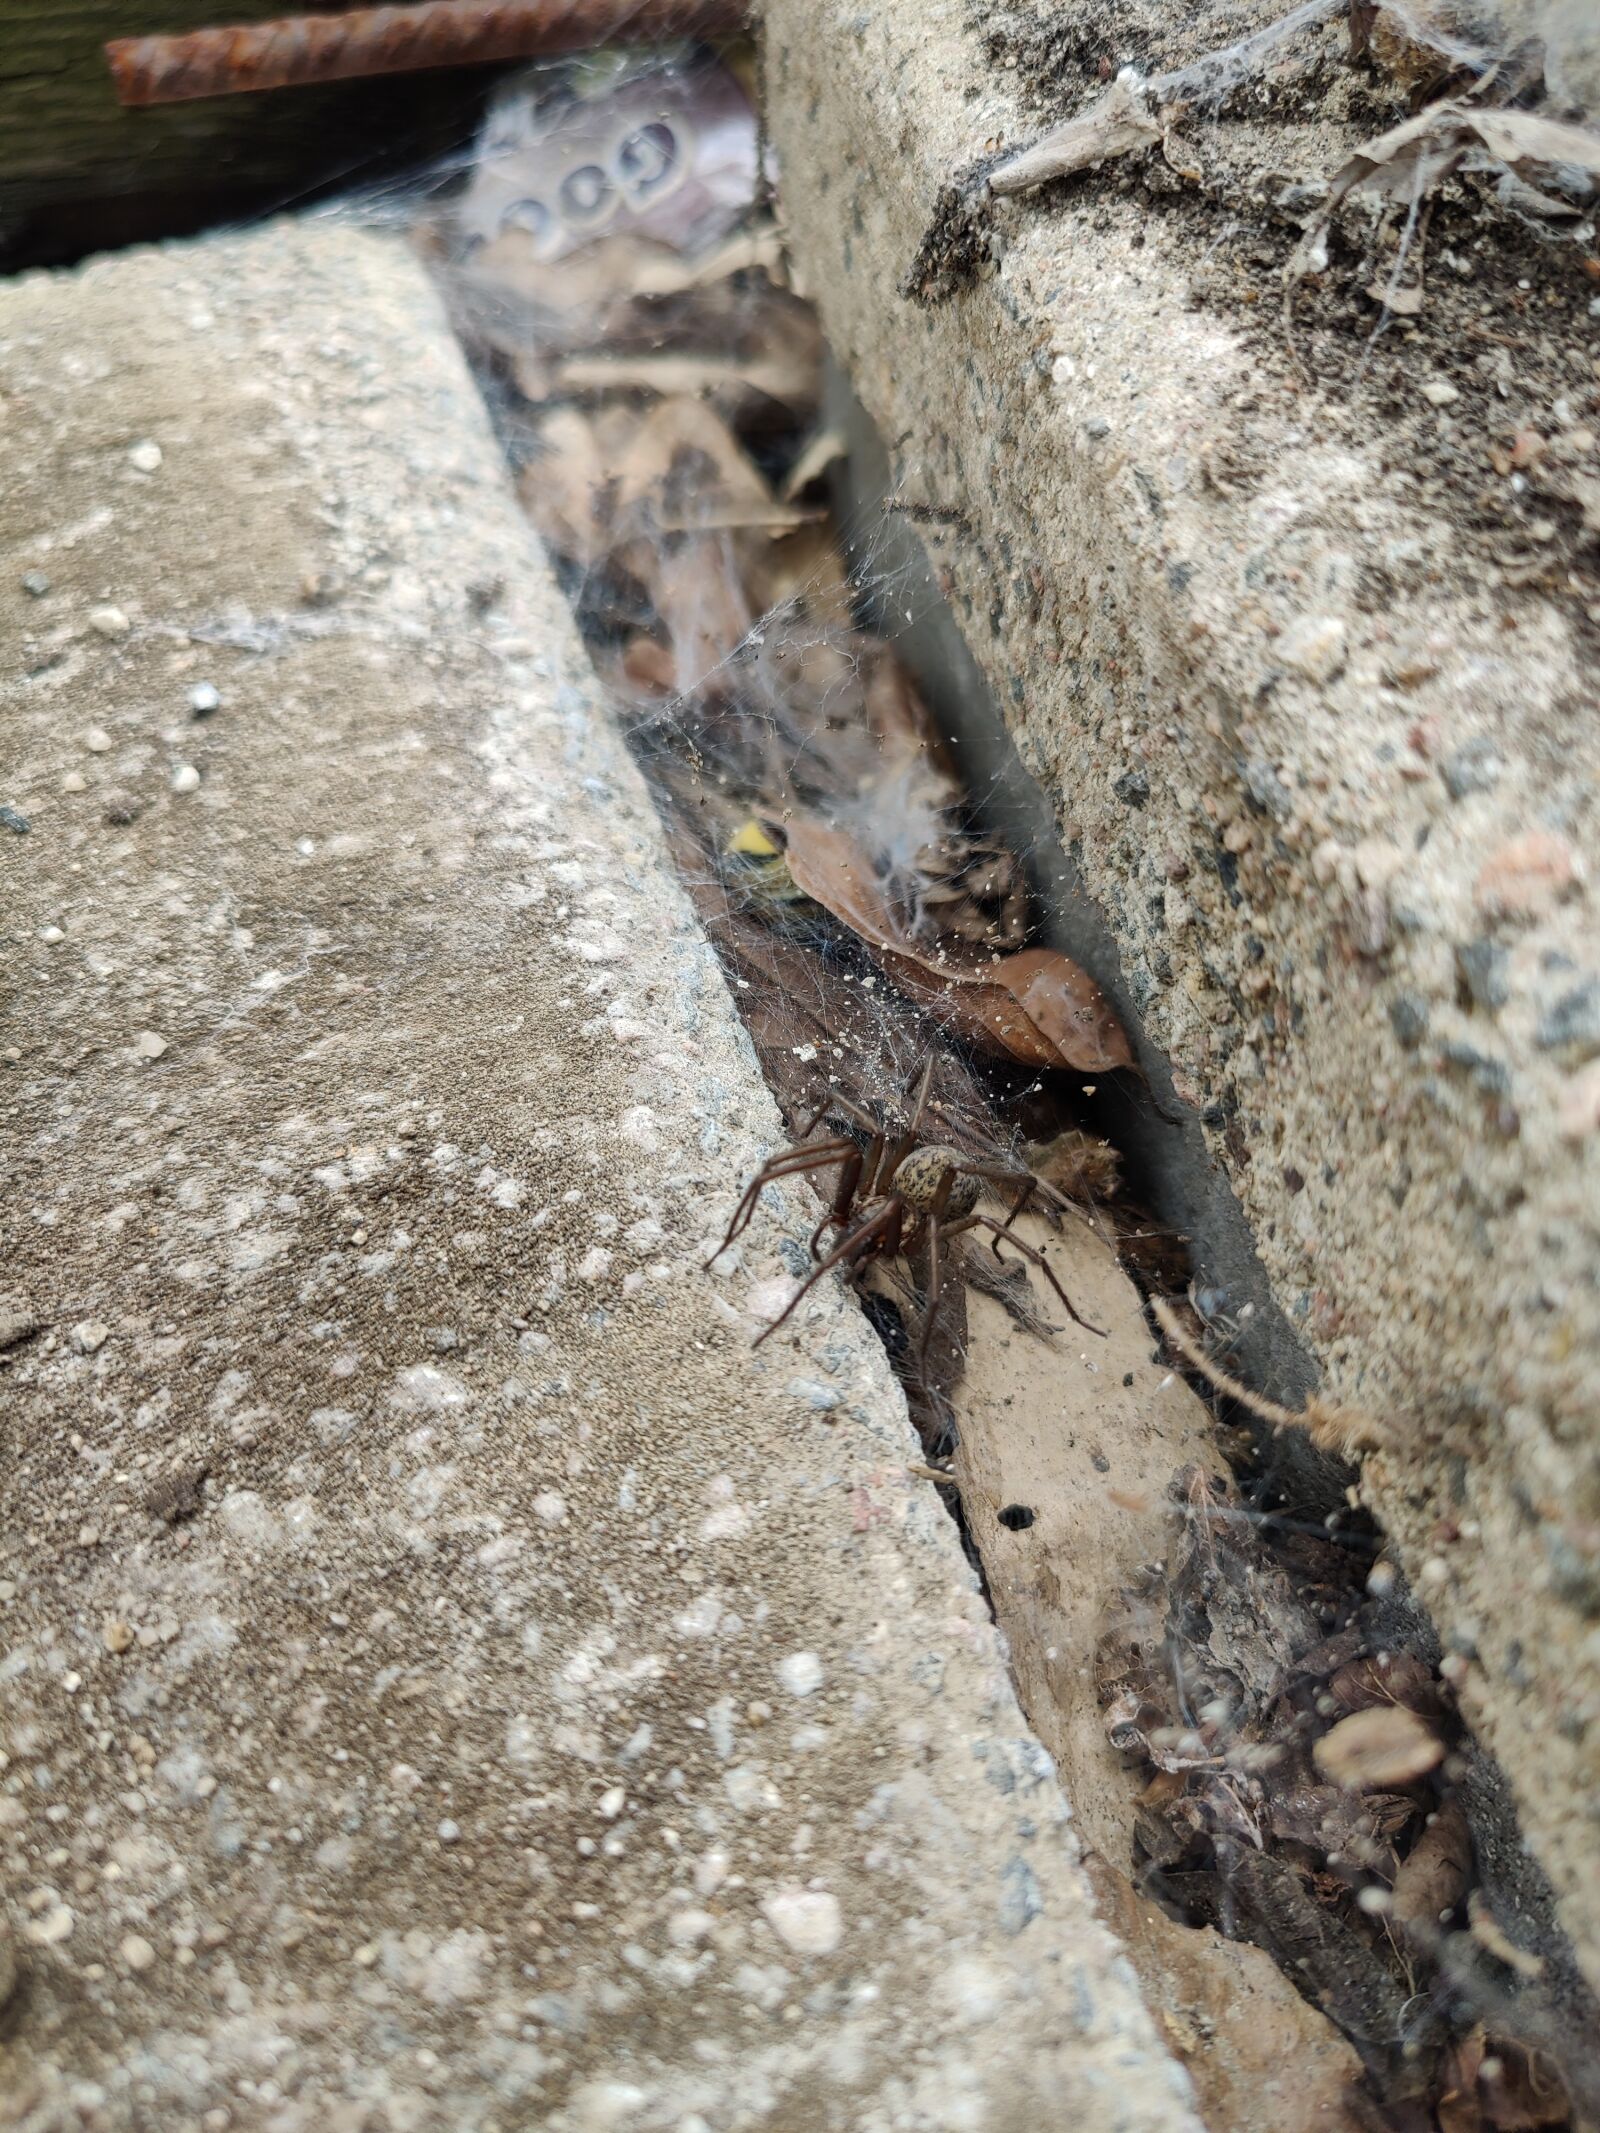 OnePlus IN2023 sample photo. Spider, jaktspindel, the spider photography